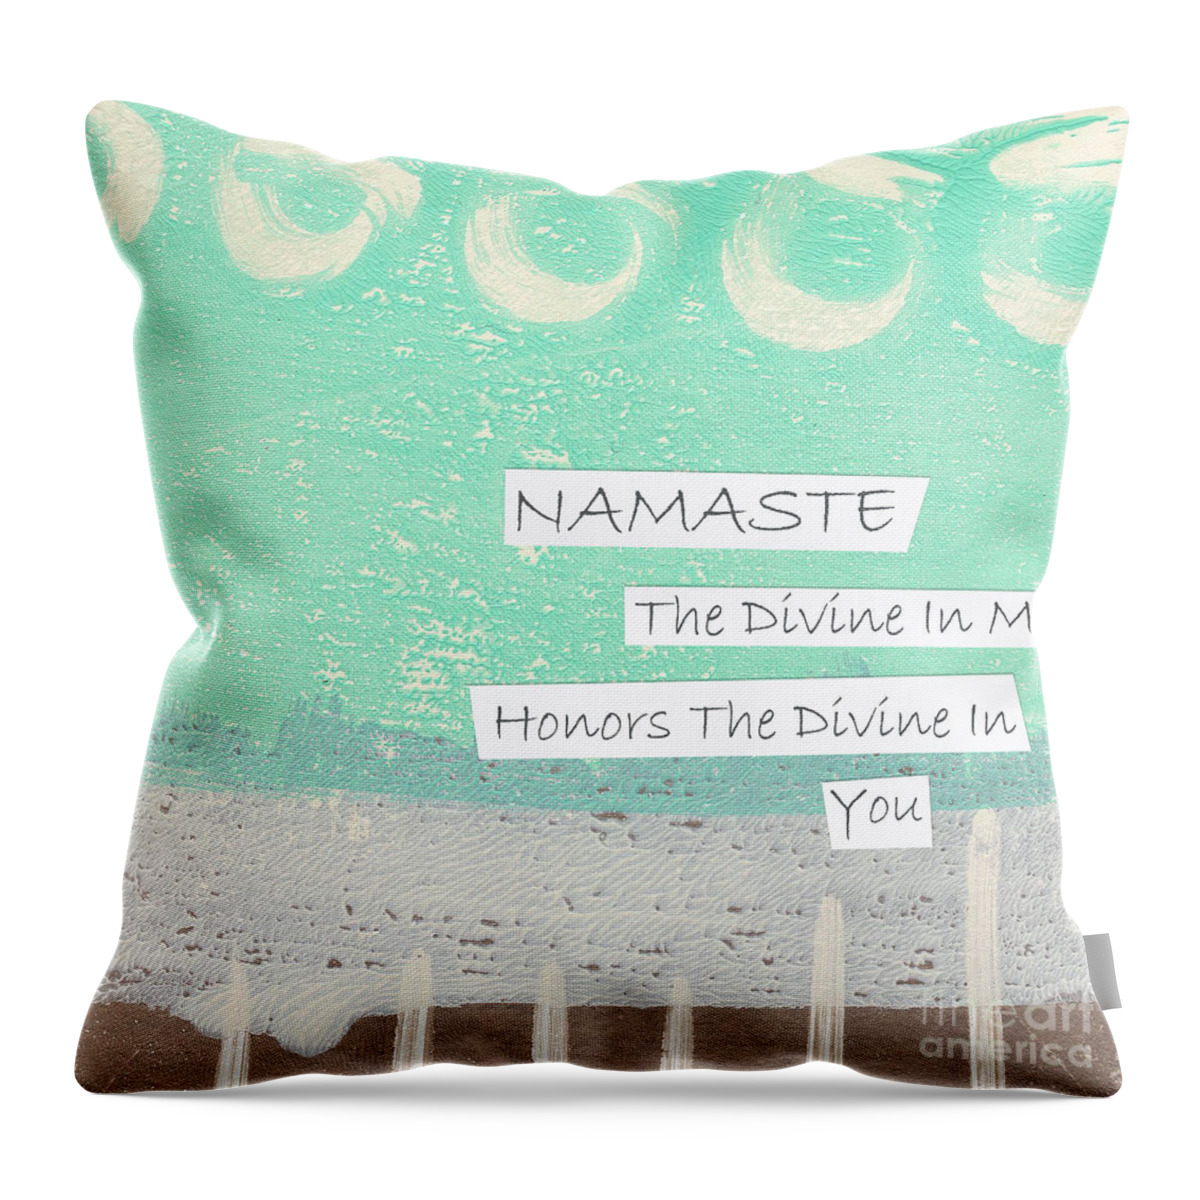 Namaste Throw Pillow featuring the painting Namaste by Linda Woods